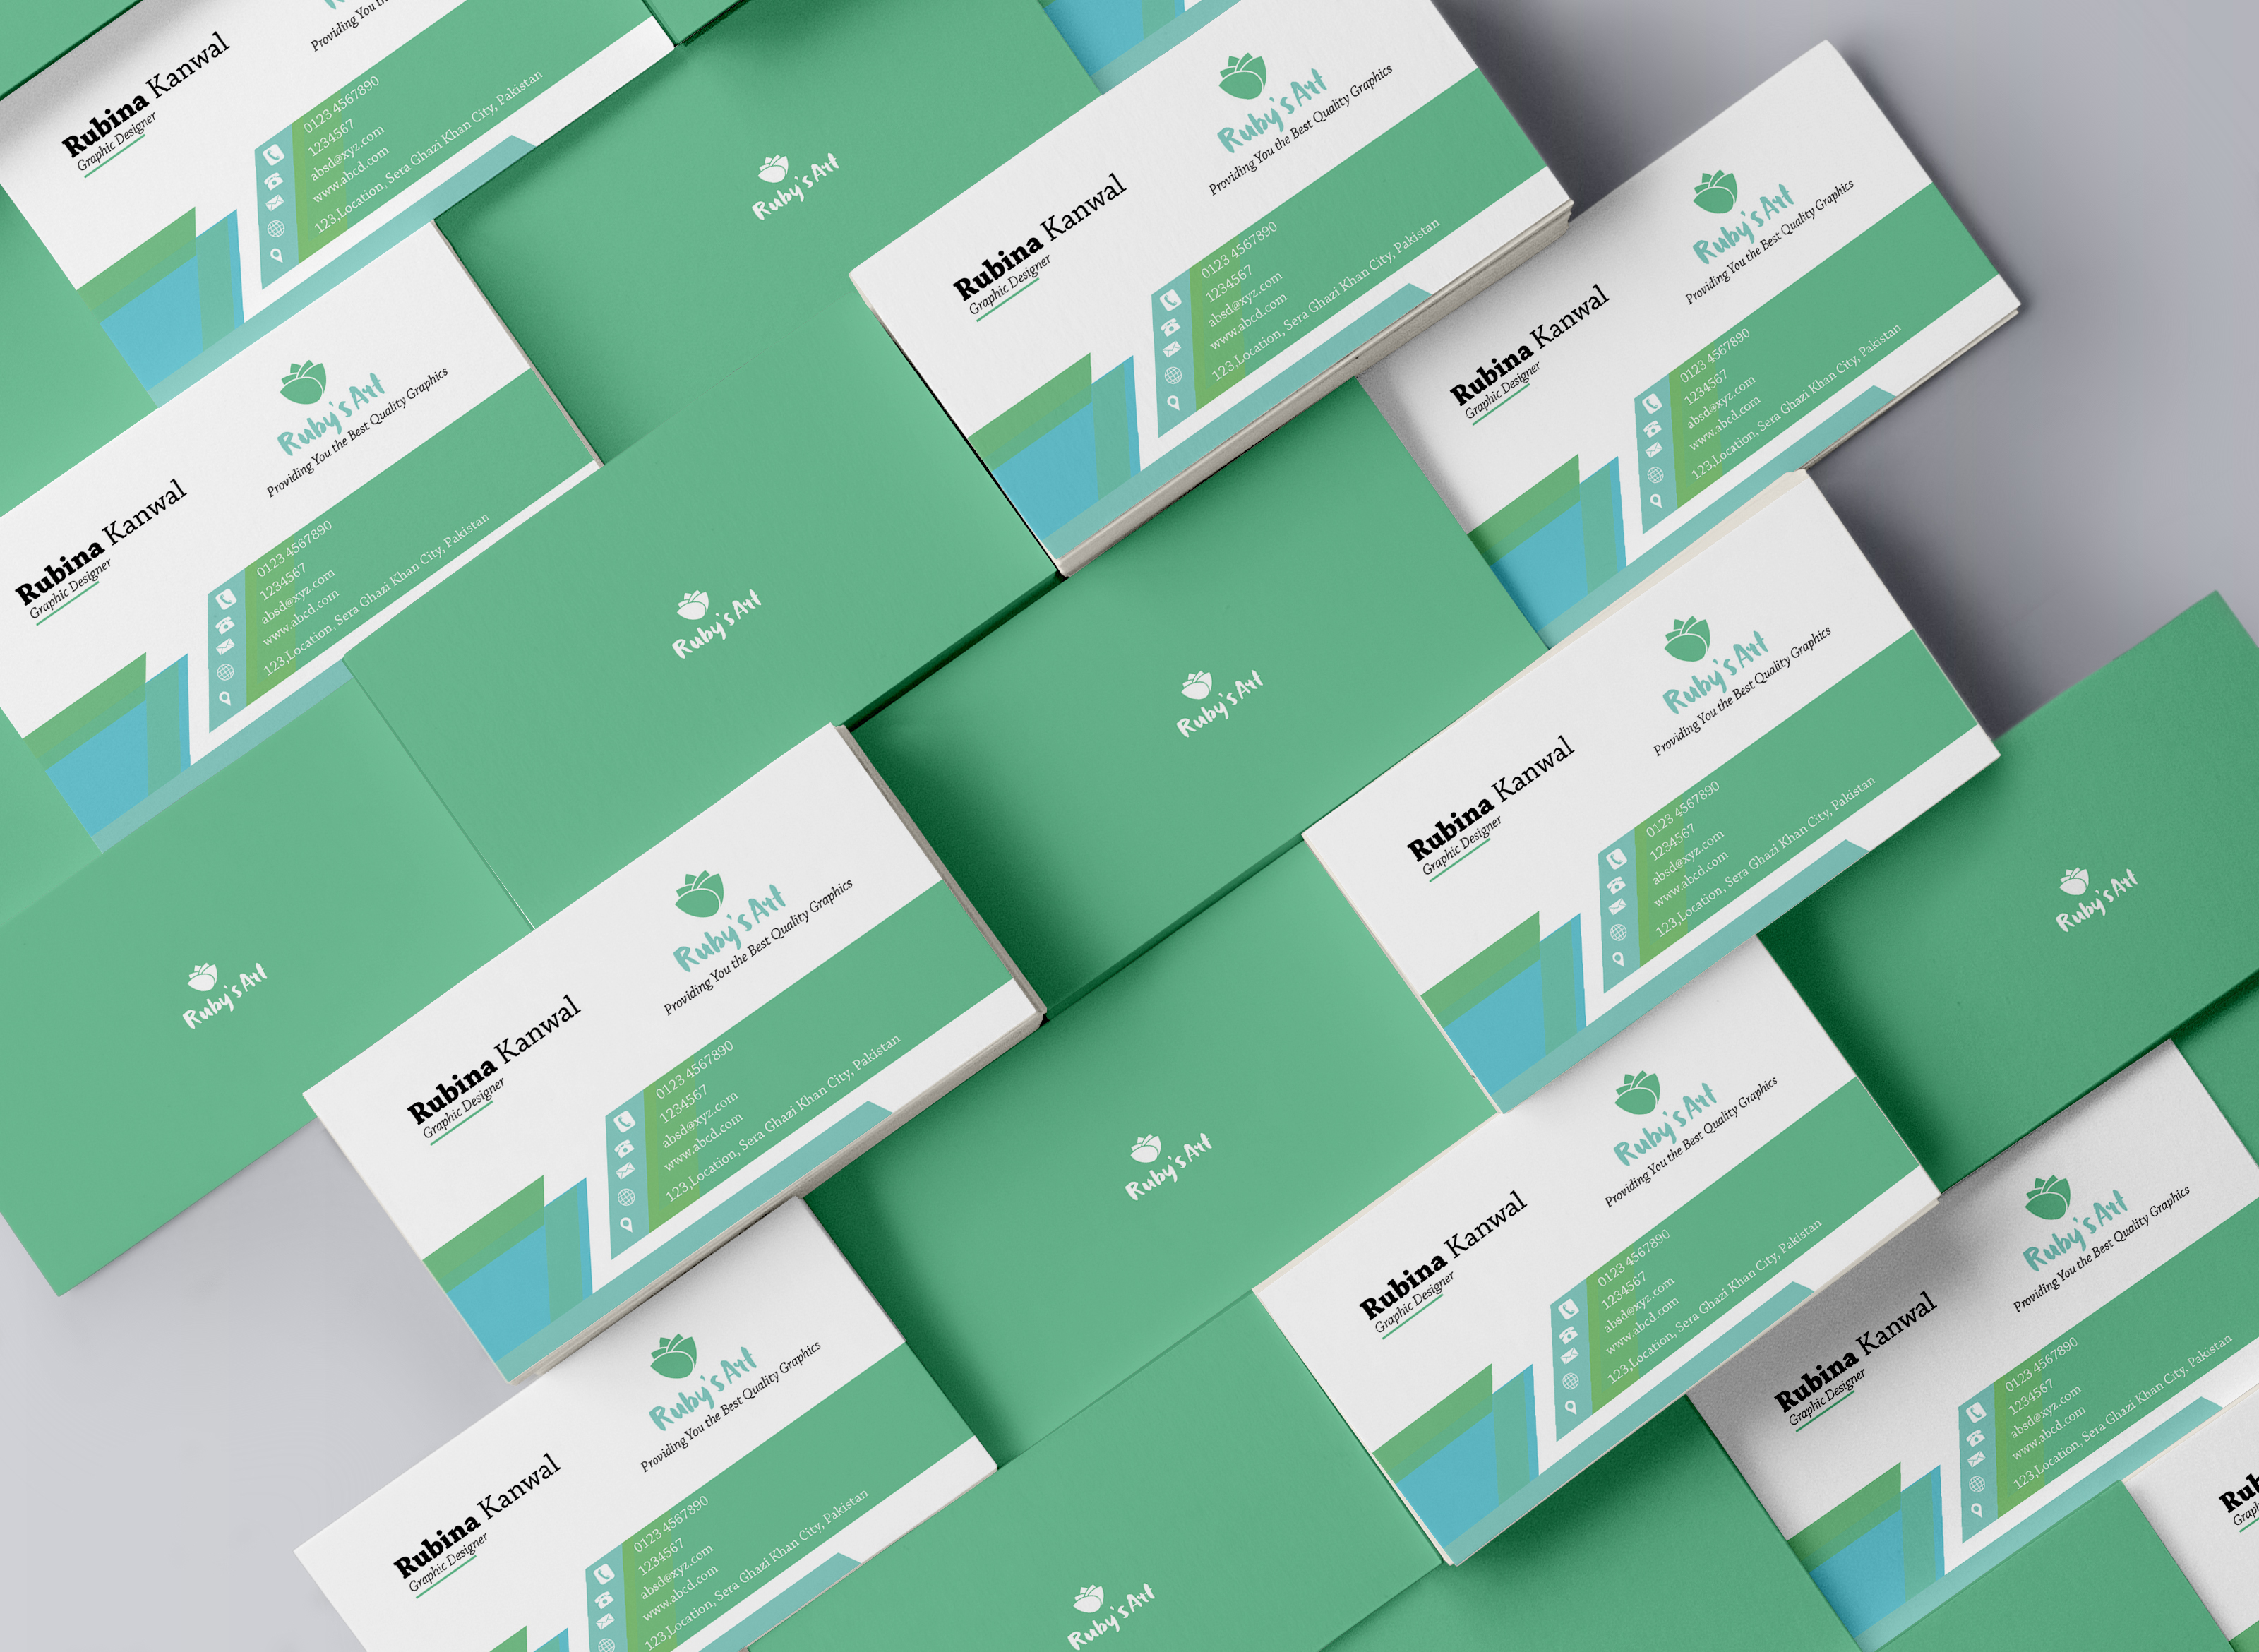 Business Card Design - Clean, Minimal, Professional for $10 - SEOClerks